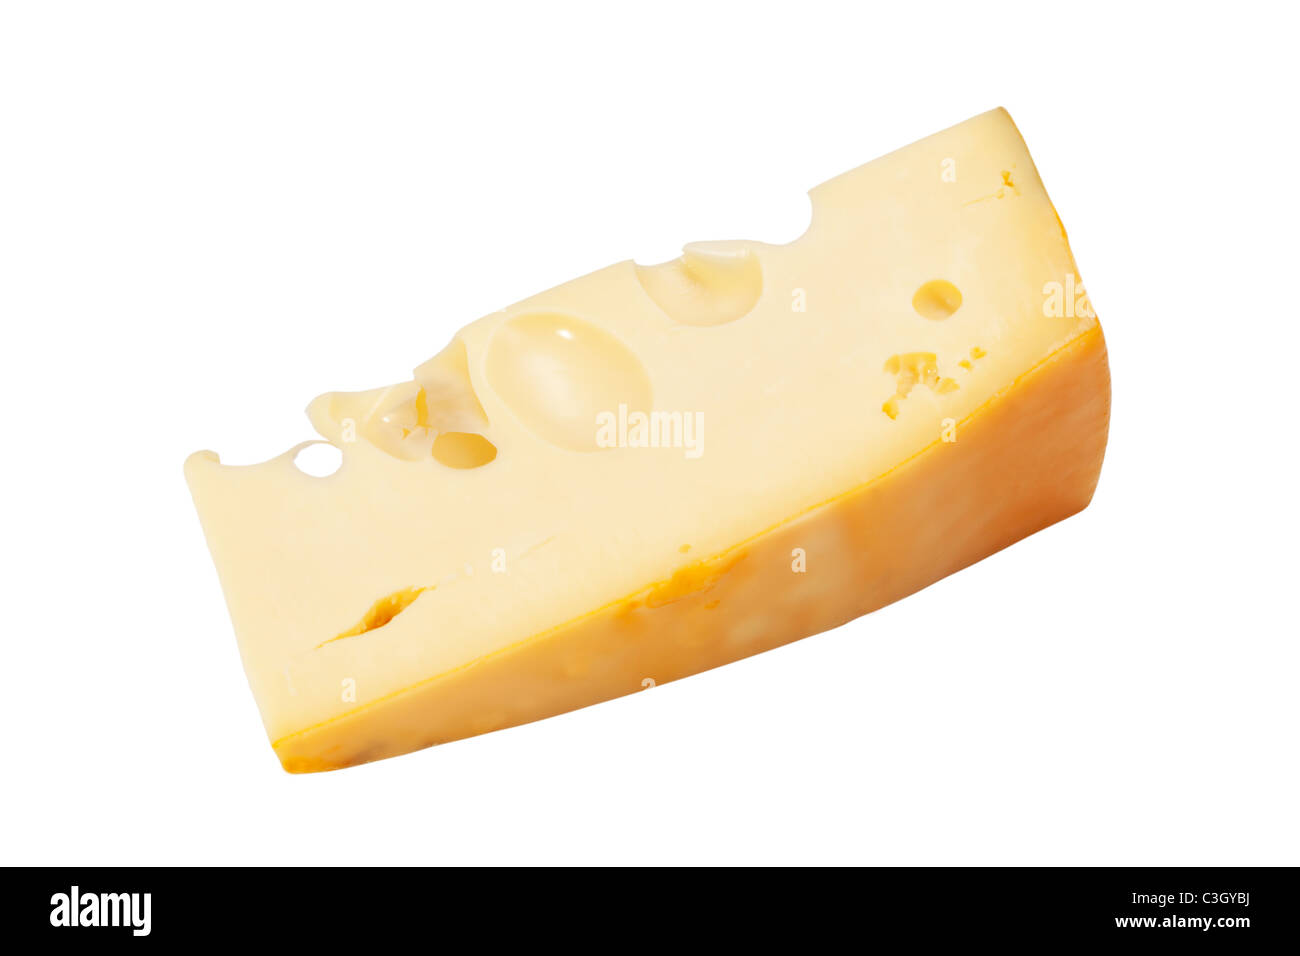 Piece of cheese Radamer isolated on a white background Stock Photo